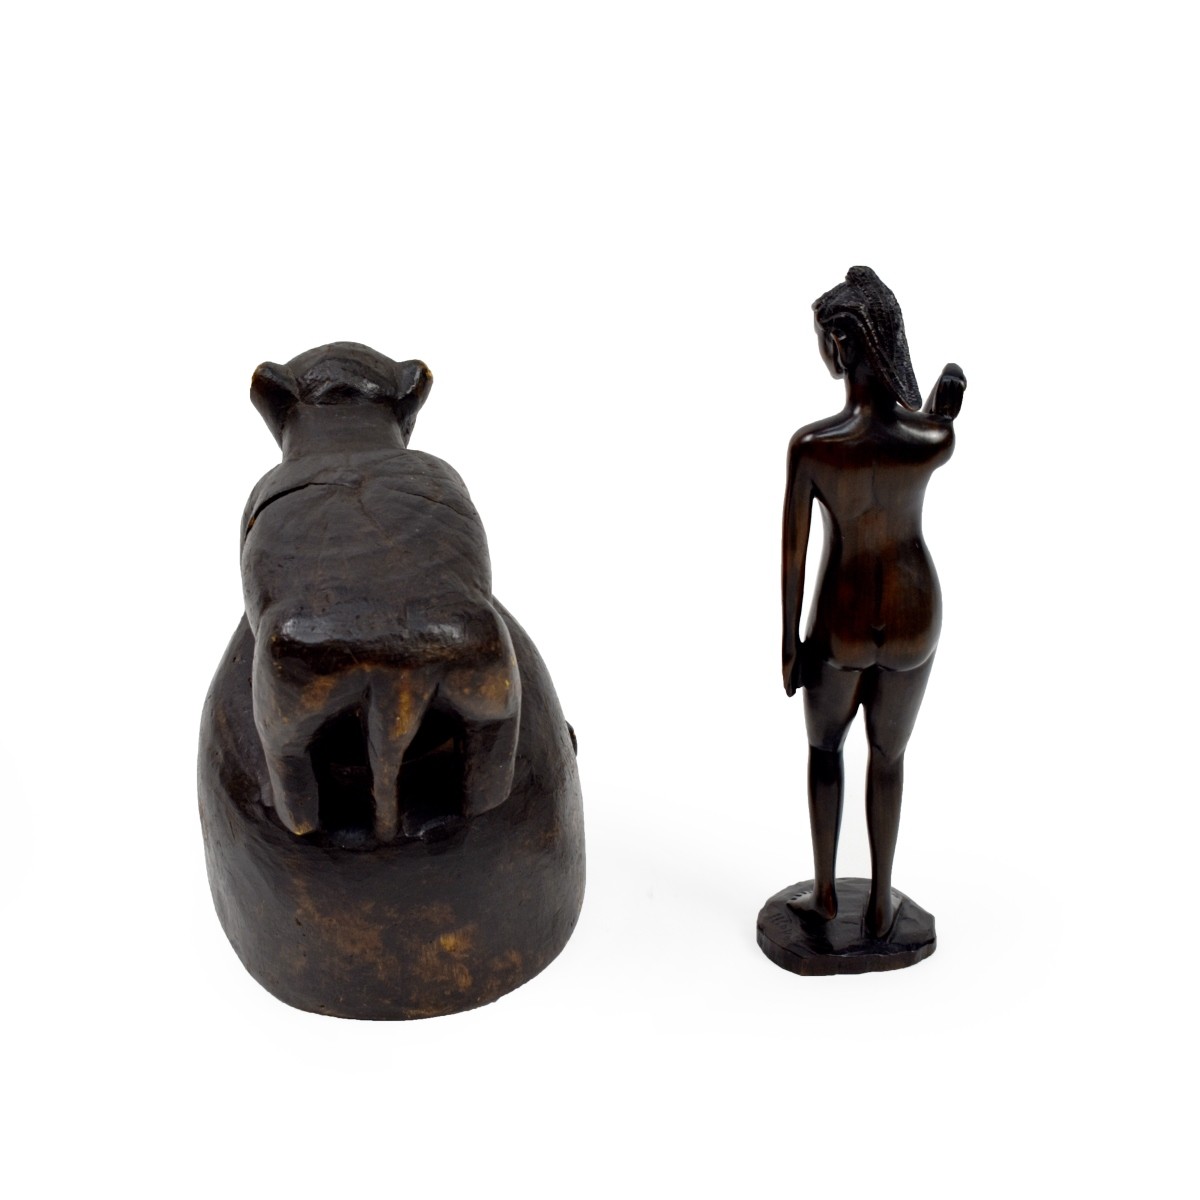 Two African Wood Carved Sculptures